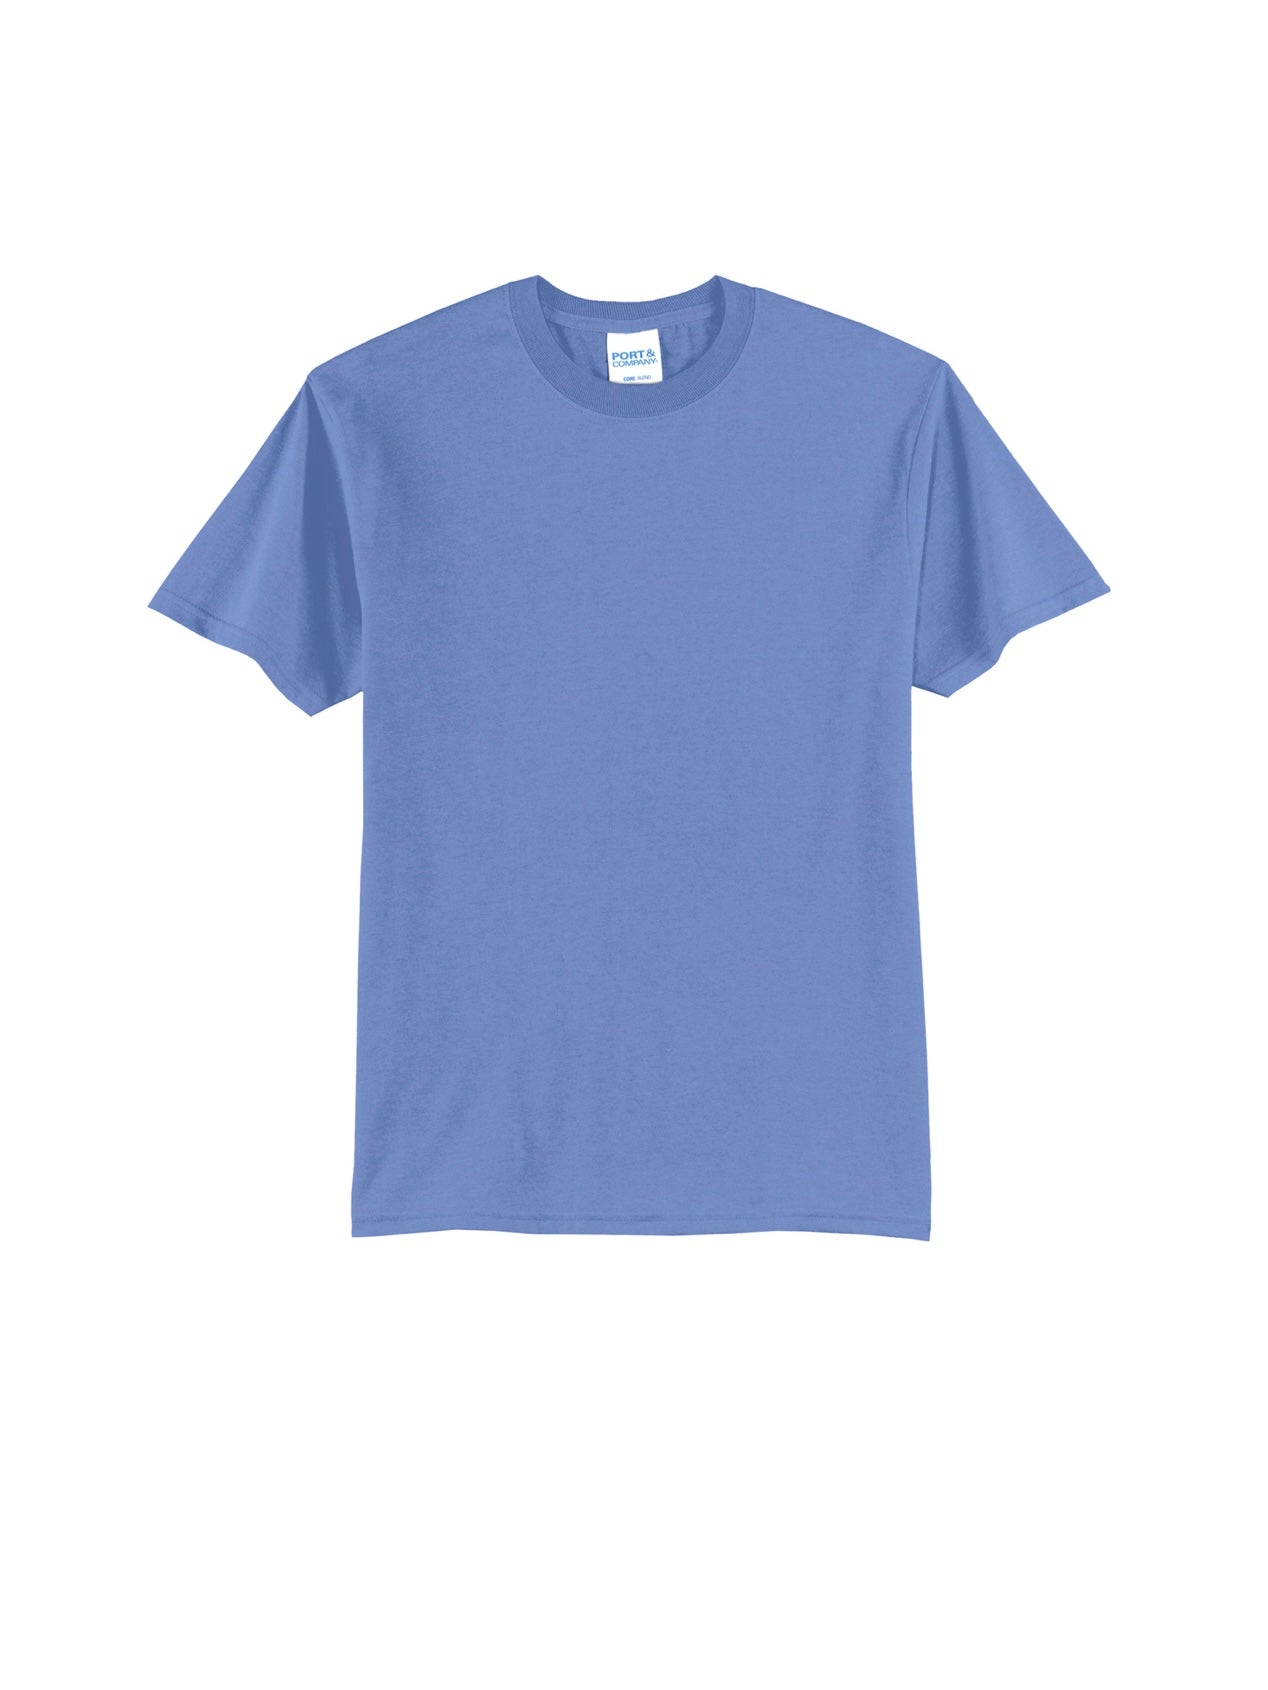 PC55 Core Blend Tee Solid Color